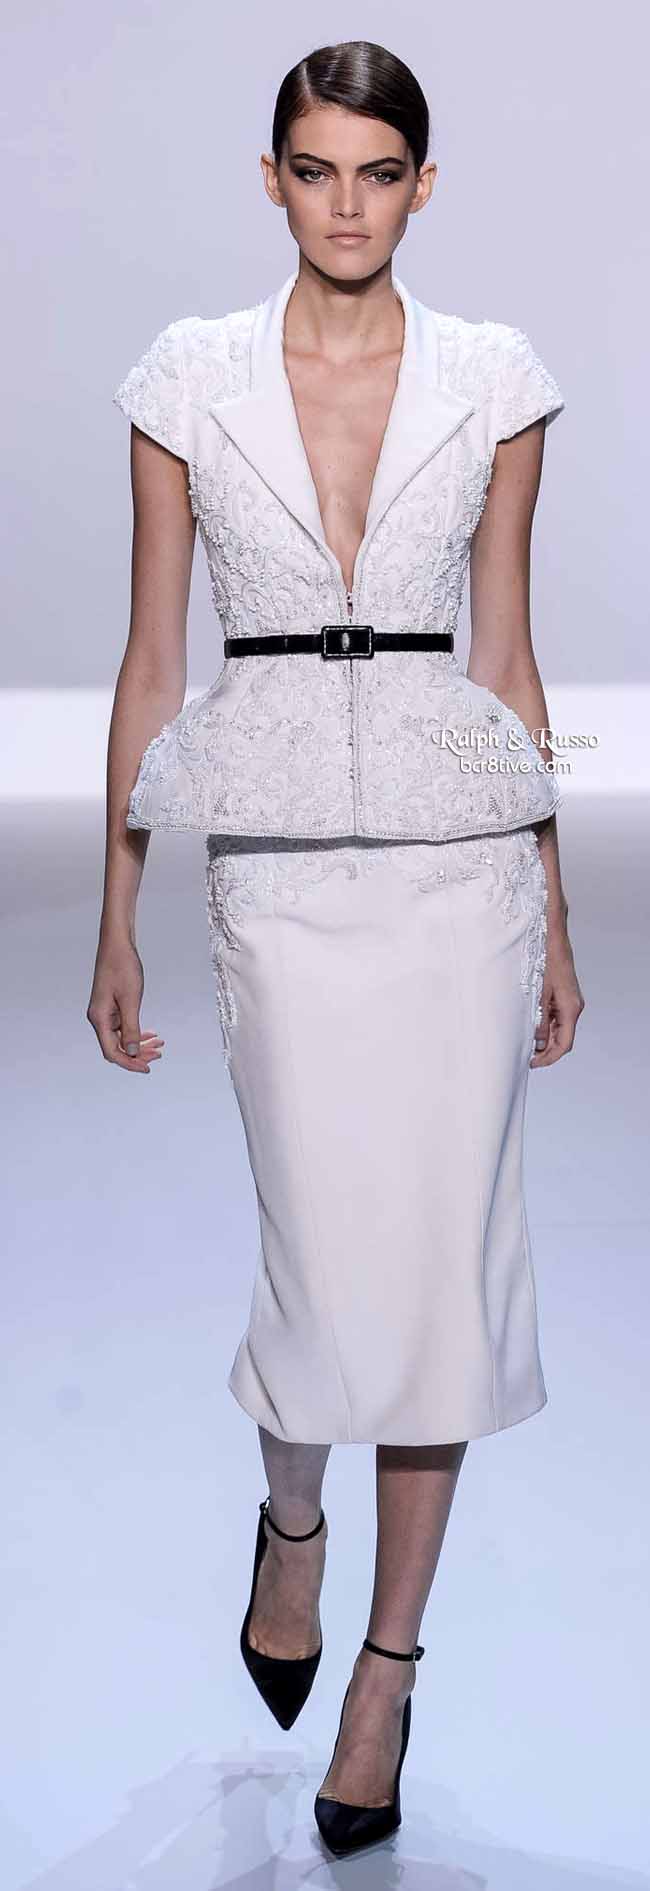 Ralph & Russo Spring 2014 Haute Couture